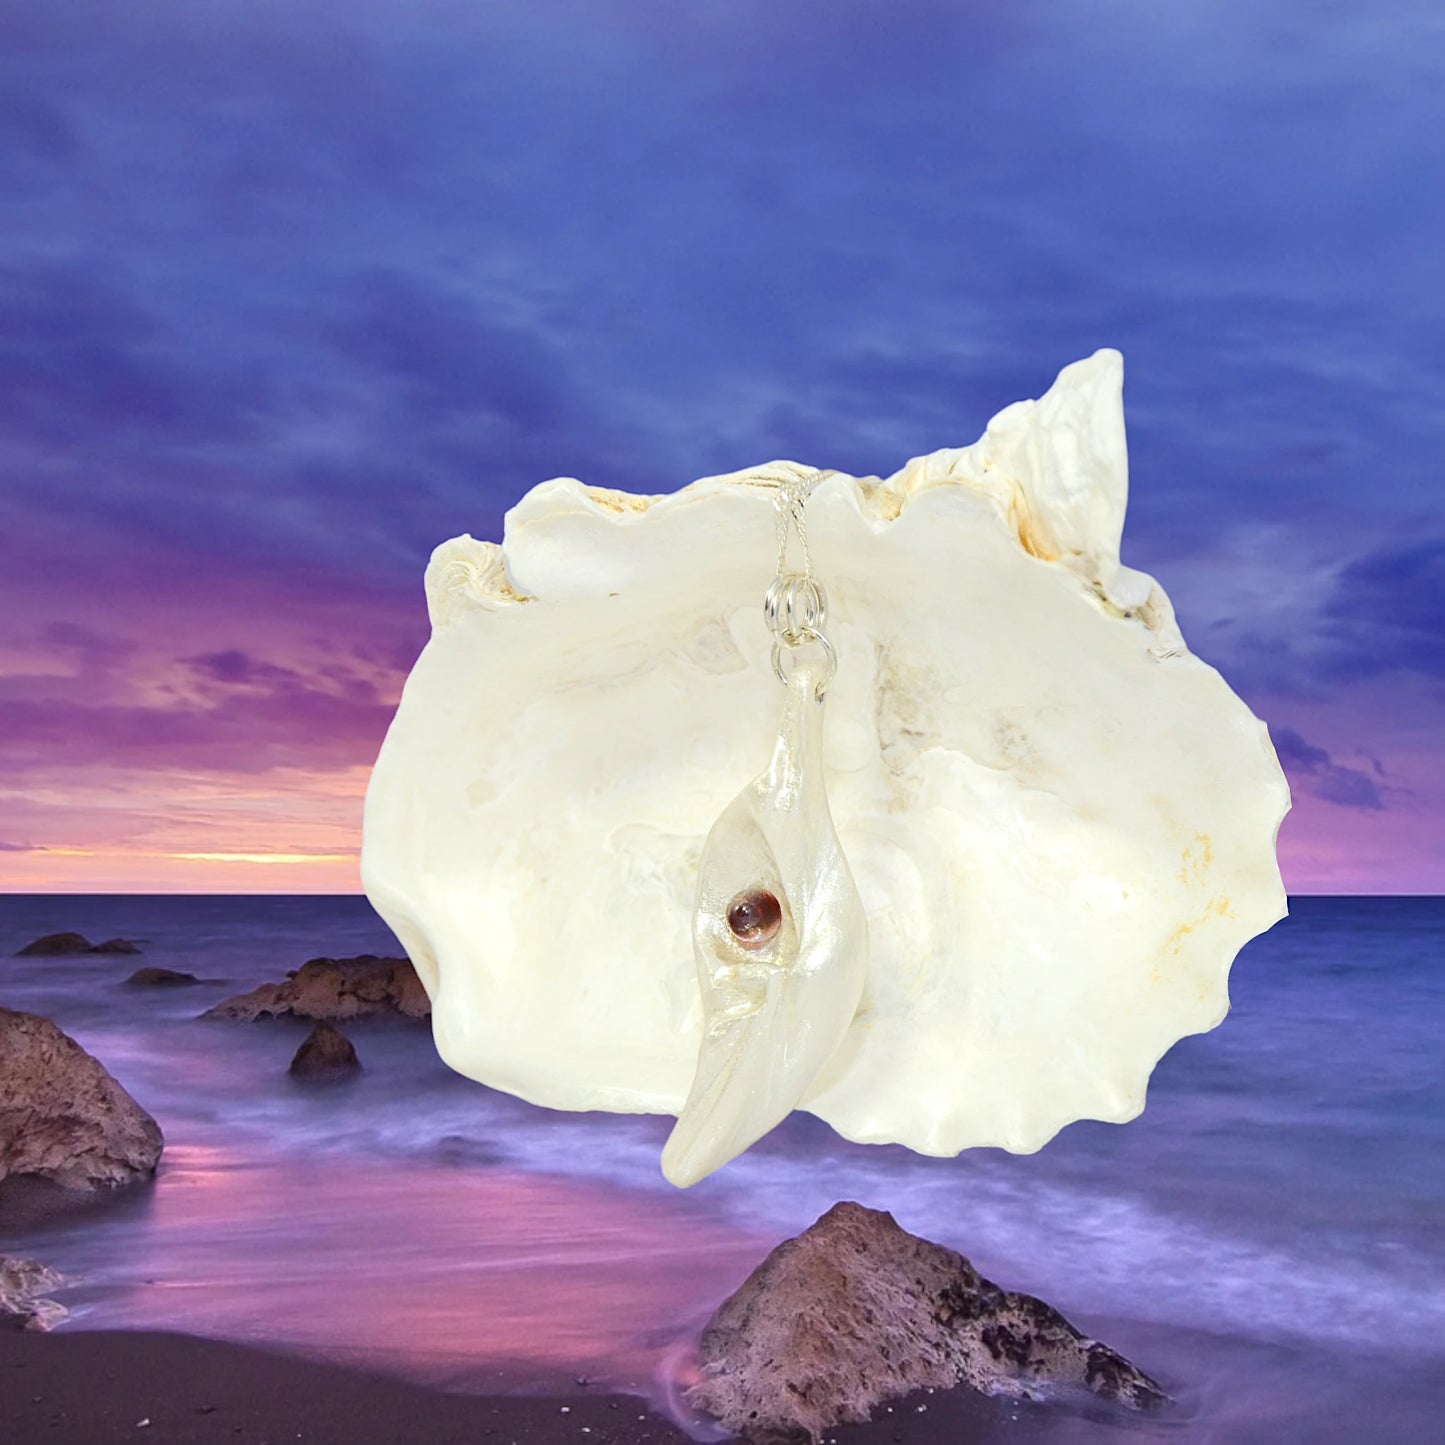 Pomegranate natural seashell pendant is adorned with a stunning Garnet gemstone. the pendant is in front of a larger seashell with a beautiful sunset over the ocean in the background.